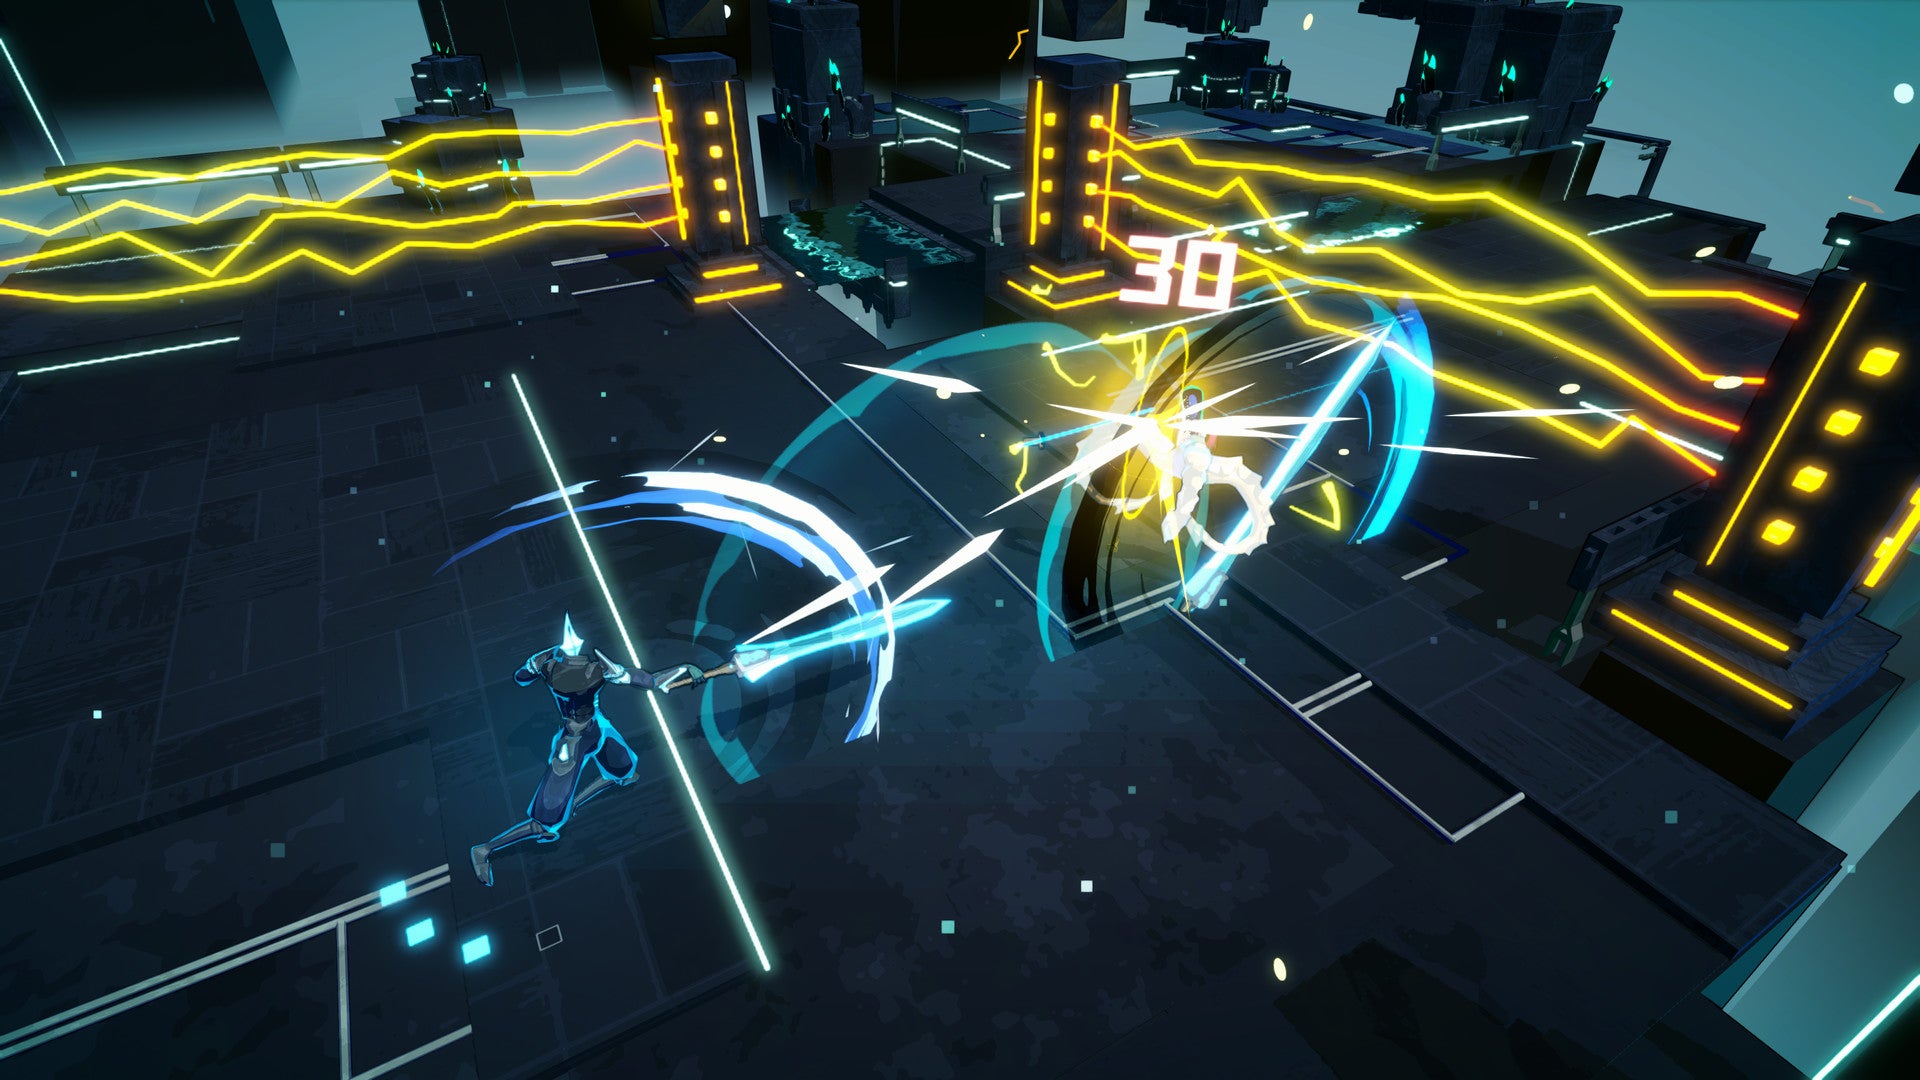 Deflector review (early access): a chaotic roguelike with boomerangs and bugs